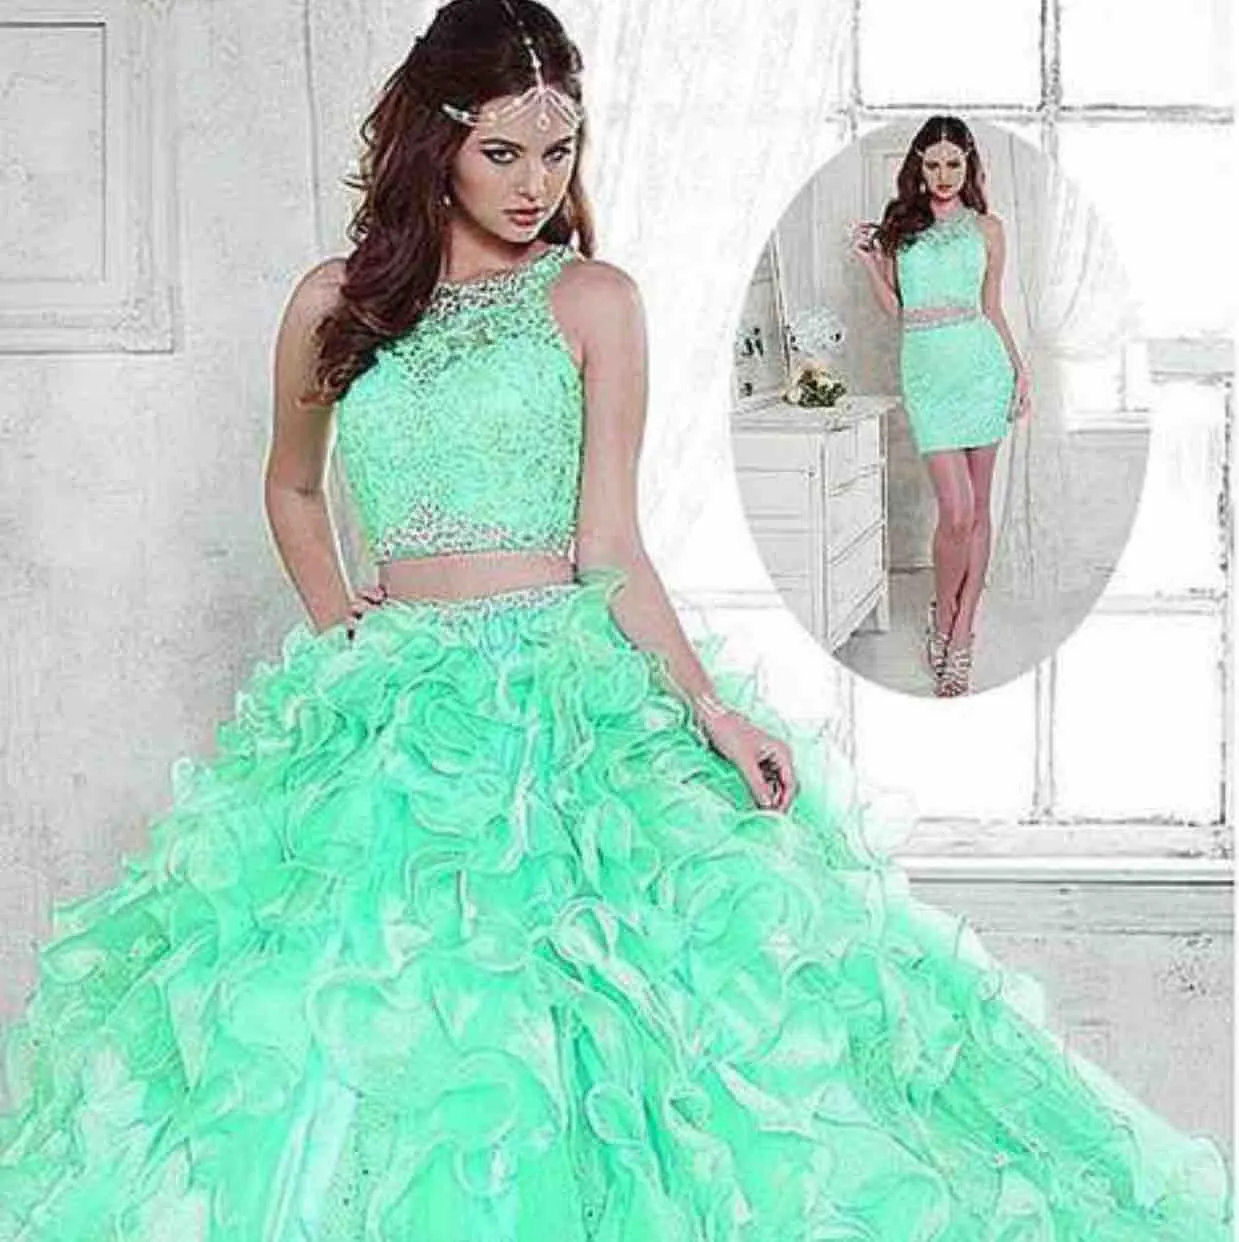 Pay link 3 pieces Lace Quinceanera Dresses Mint Beads Crystal Organza Prom Ball Gowns Sweet 16 Dresses Formal Dress for 15 years C2468